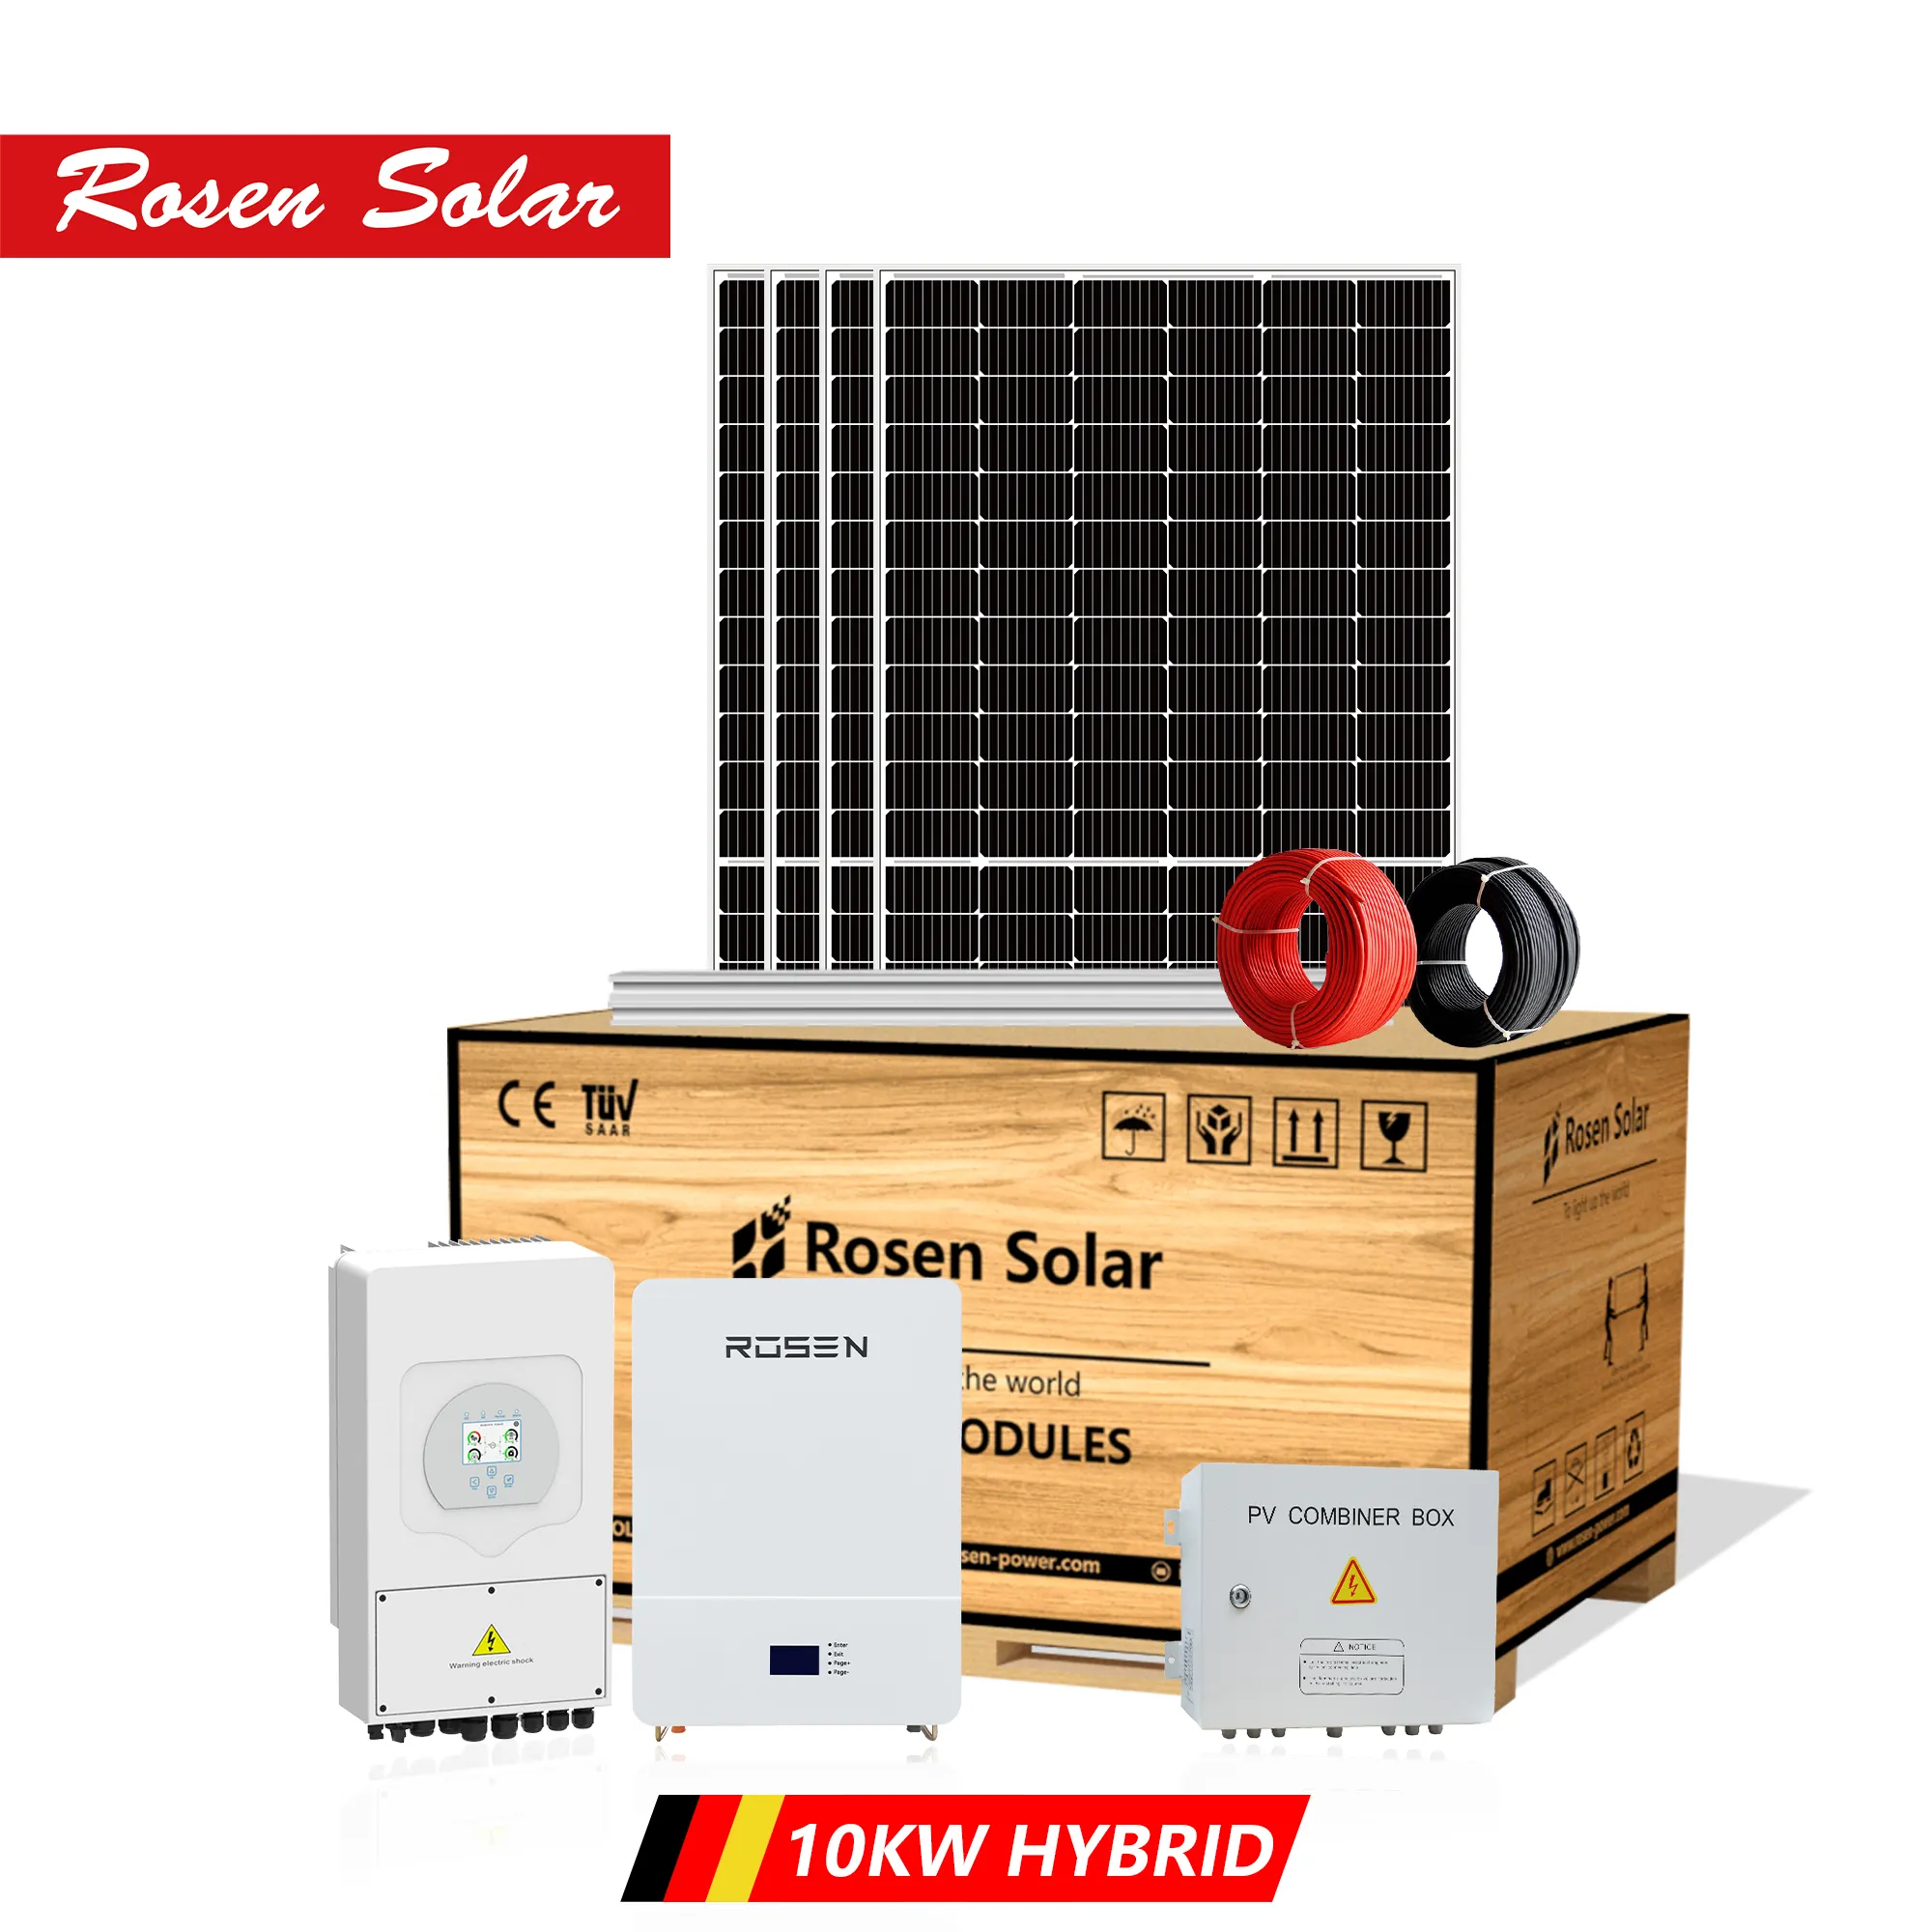 Hot Sale Rosen solar systems complete 10kw hybrid solar systems for balcony and with high quality